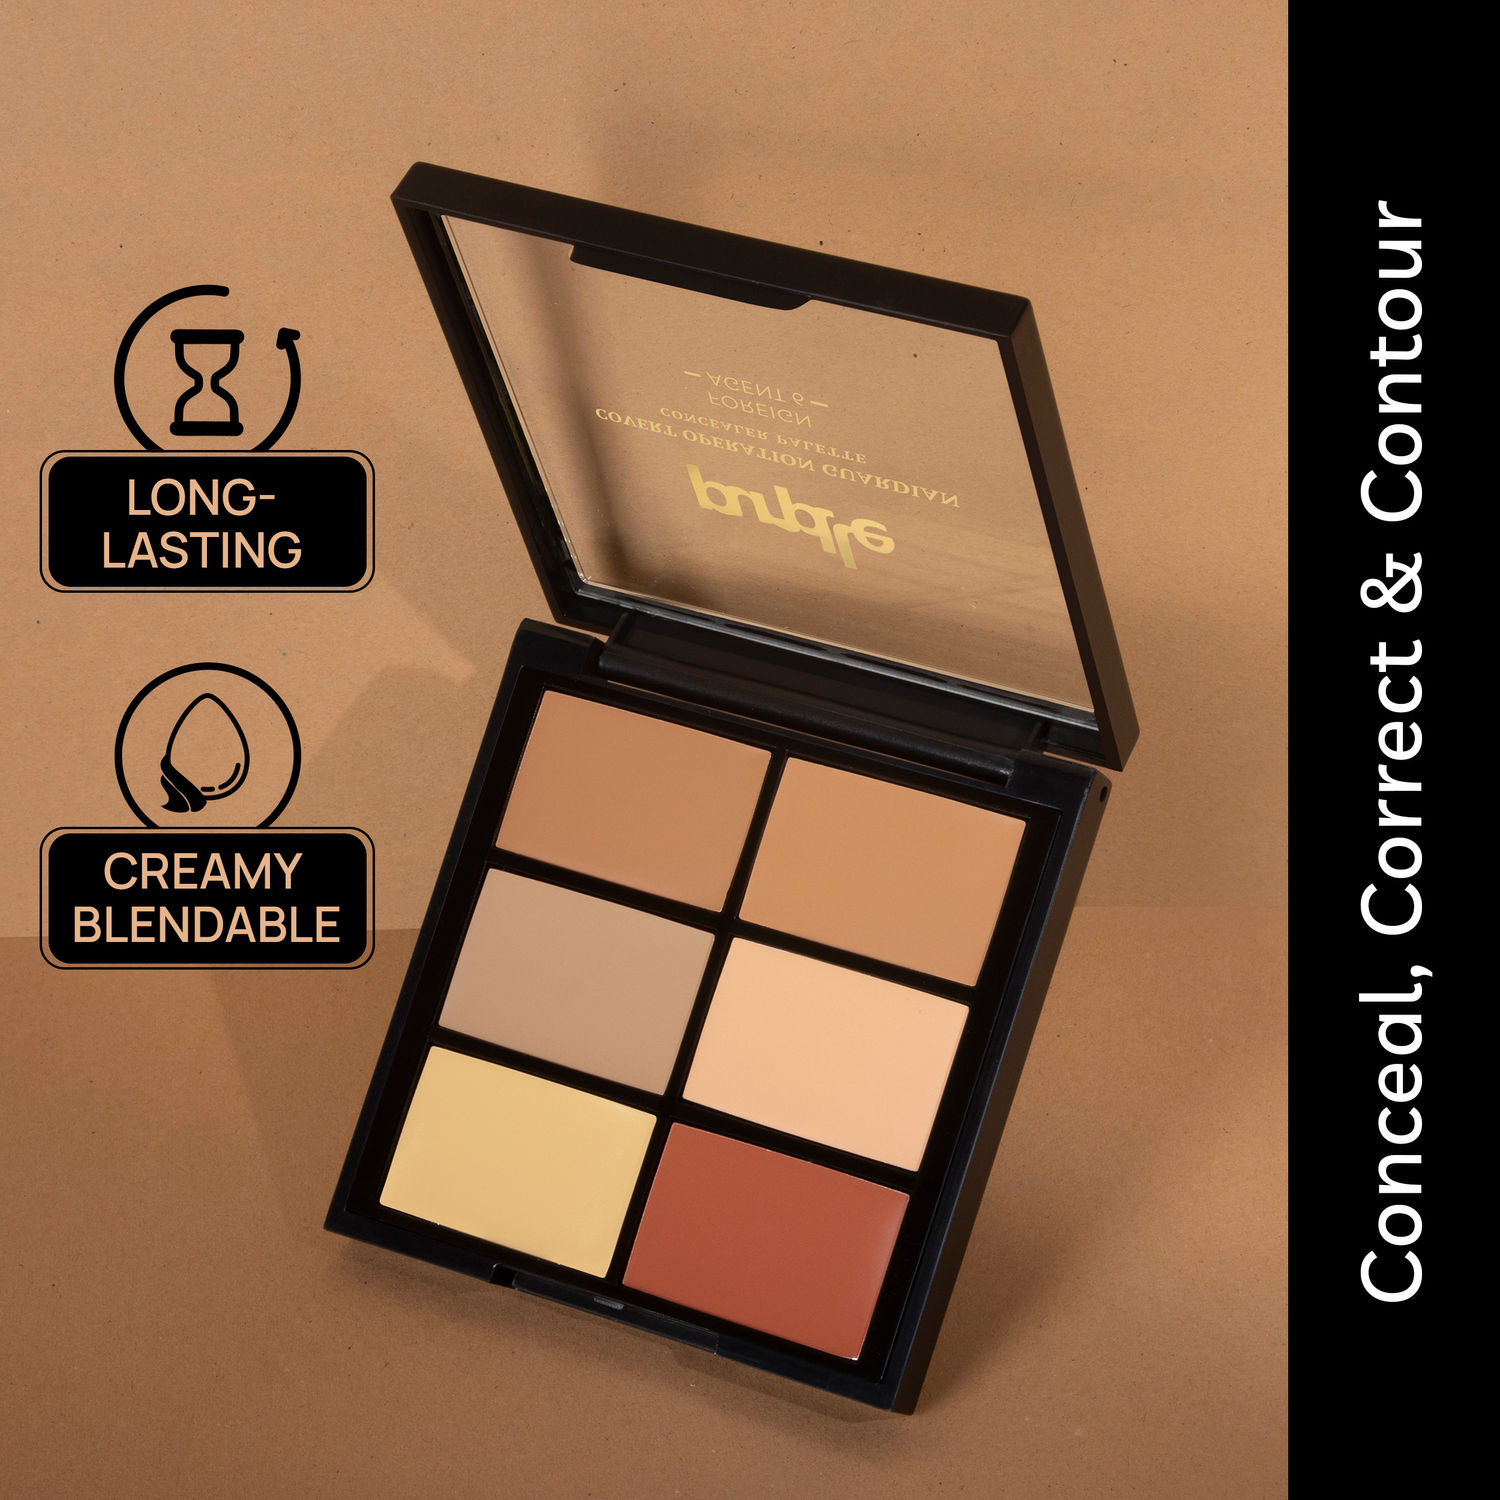 Purplle Concealer Palette (Wheatish Skin), Covert Operation Guardian - Foreign Agent 6 (12 g)